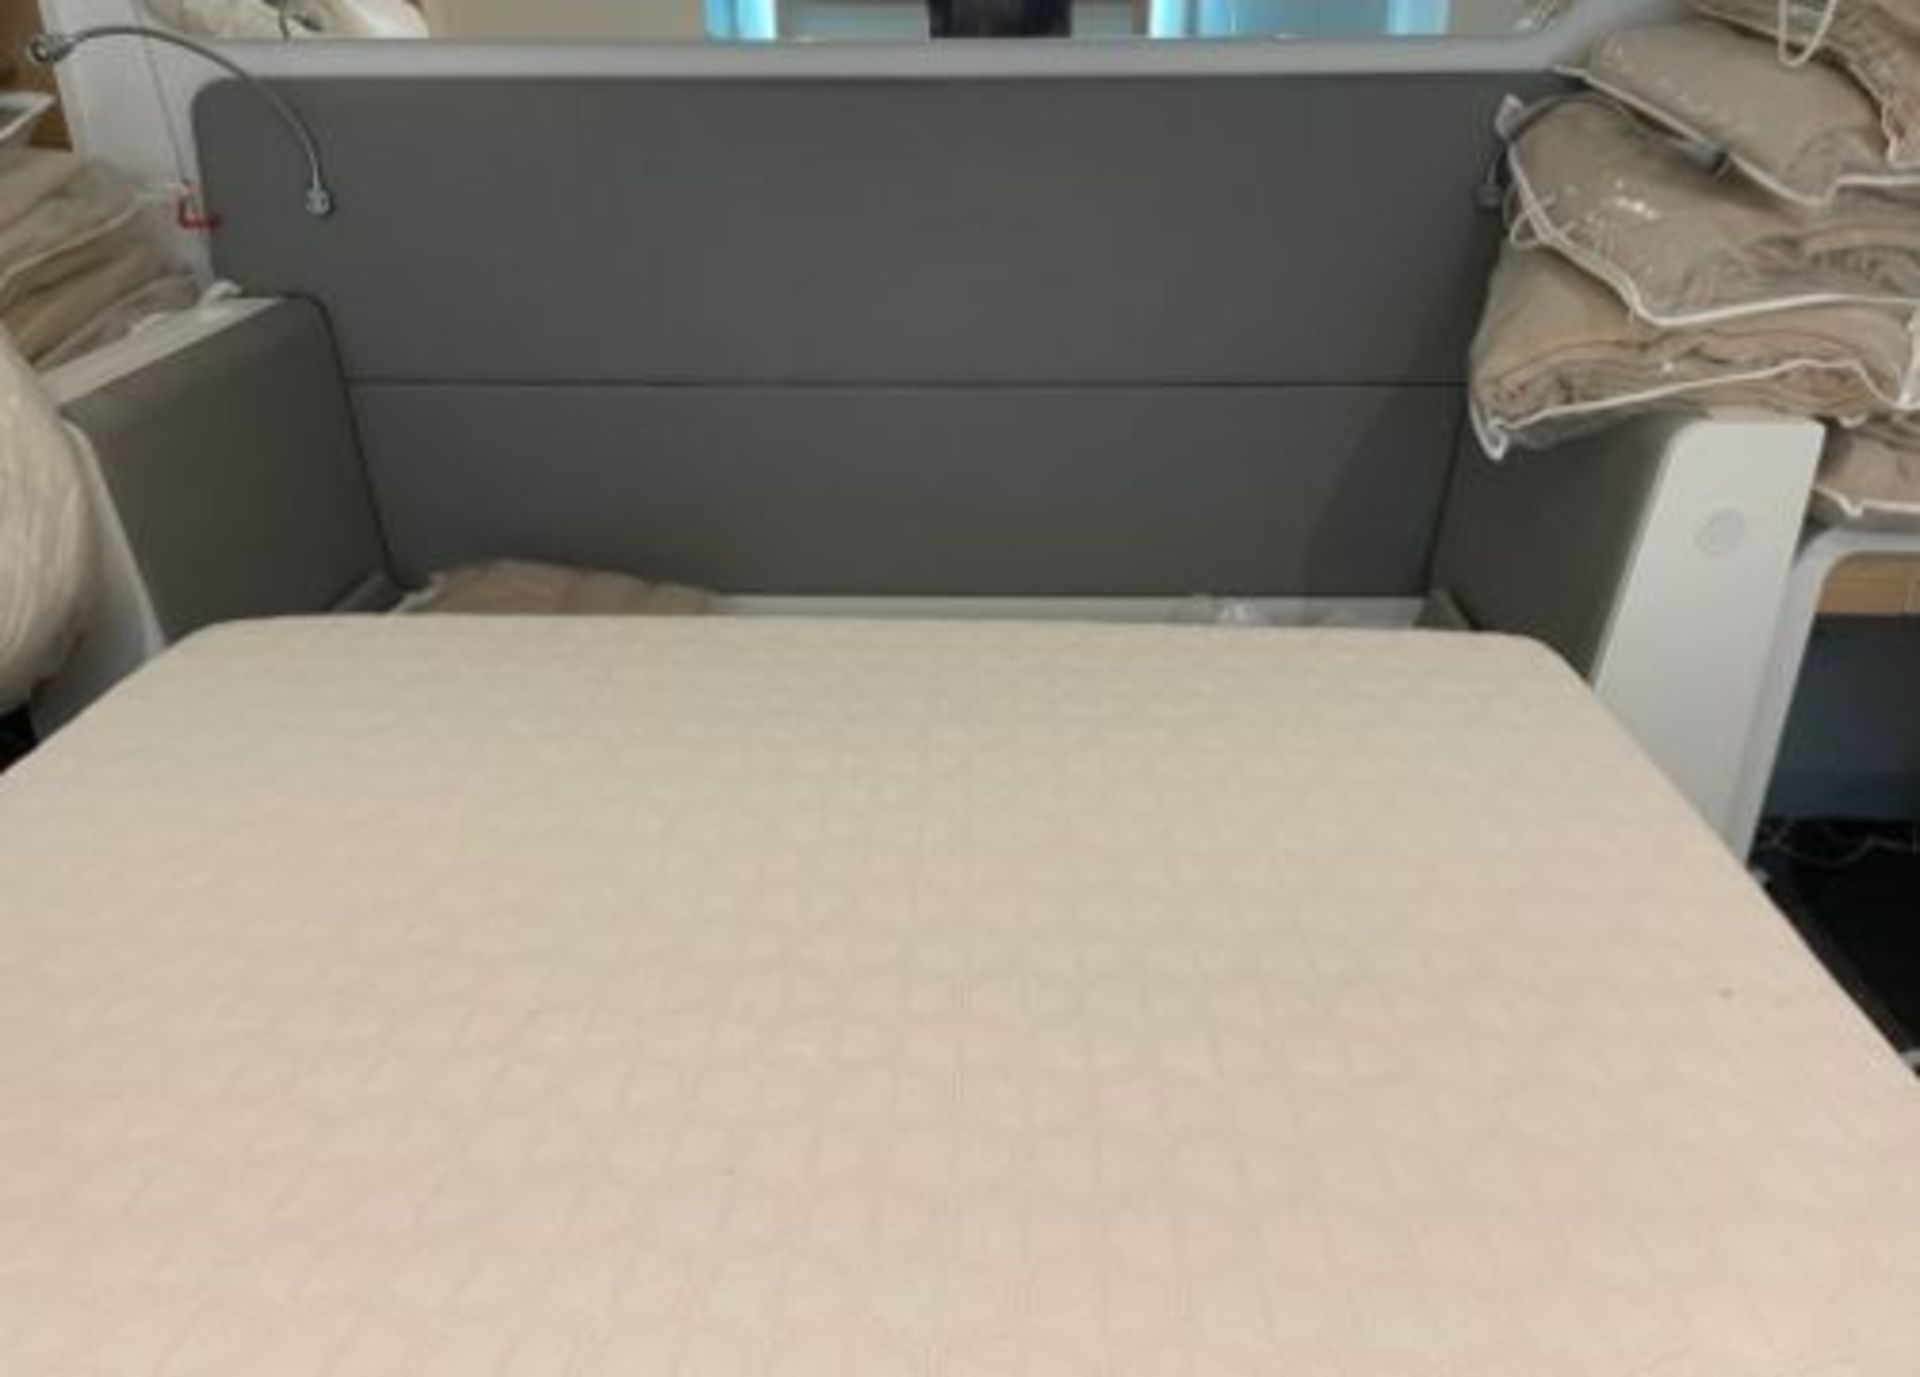 1 x Double Adjustable Space Saving Smart Bed With Serta Motion Memory Foam Mattress - Signature - Image 11 of 12